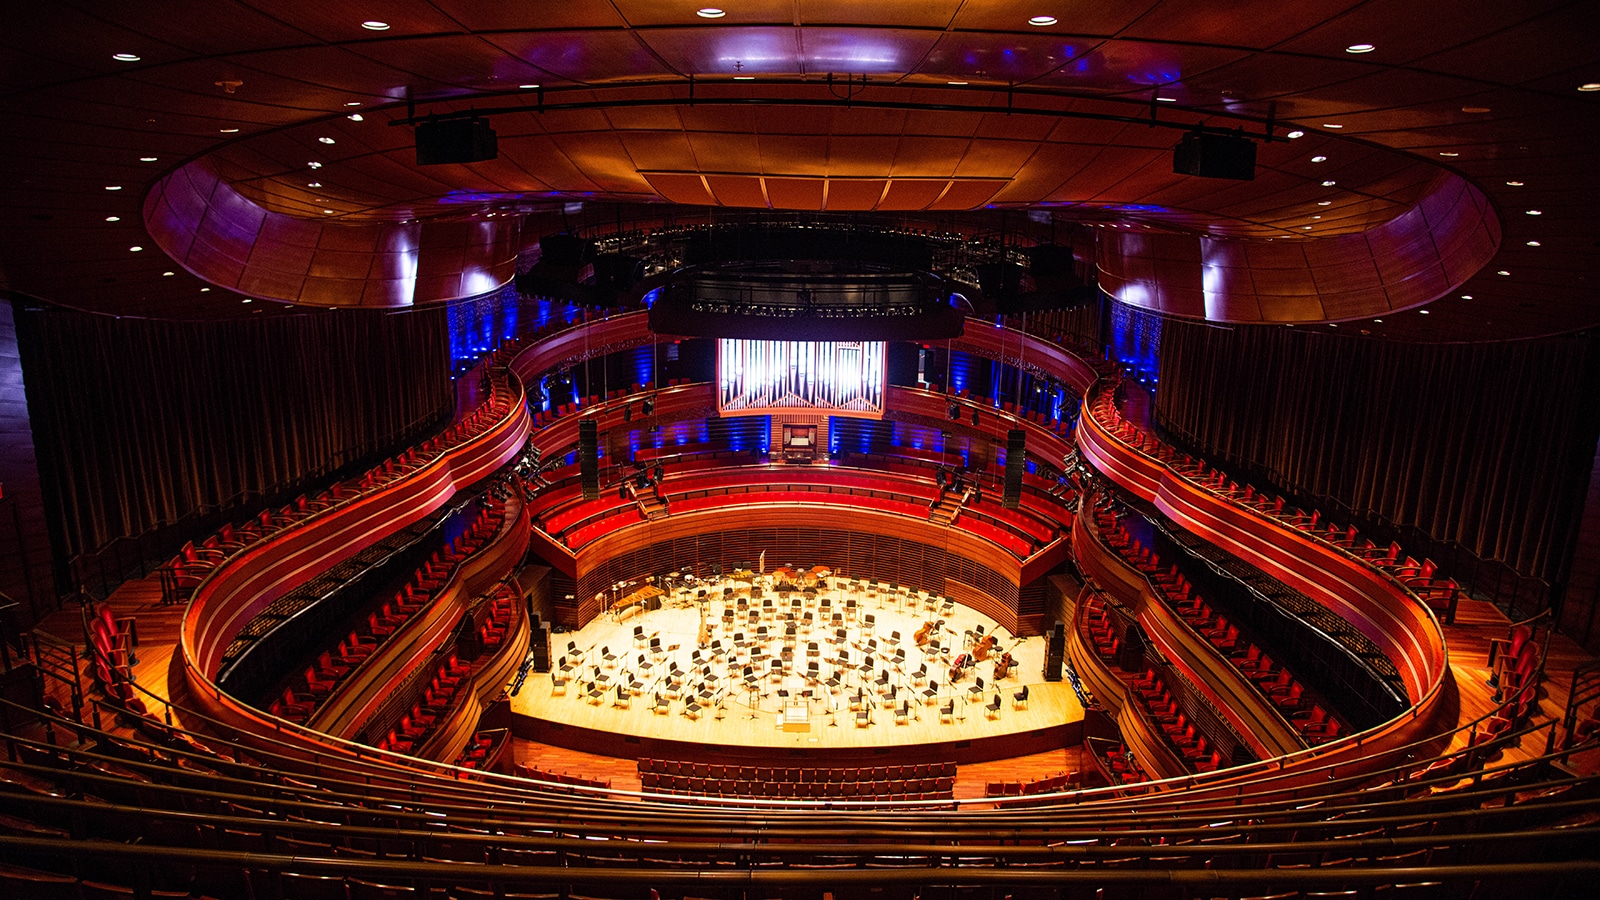 Meyer Sound Booked for Return Engagement at Philadelphia’s Verizon Hall at the Kimmel Cultural Campus